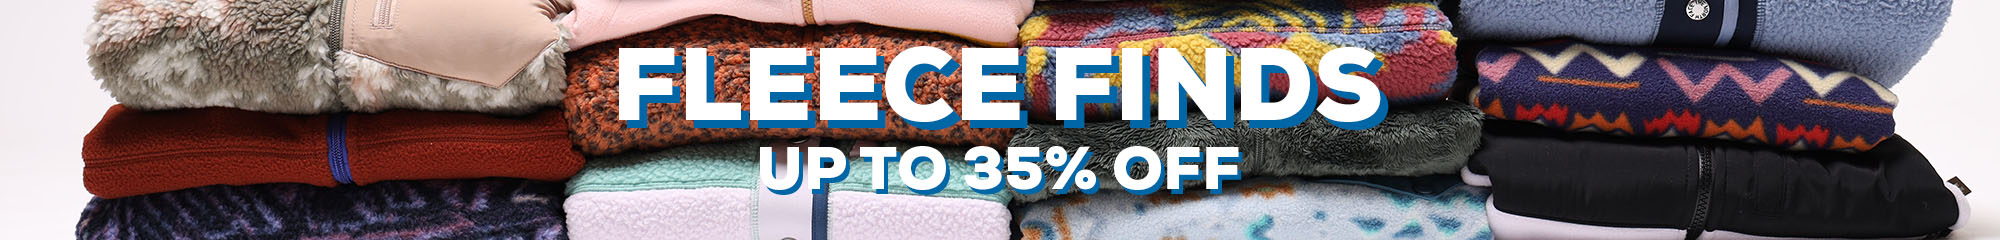 Fleece for the Entire Family on Sale now!